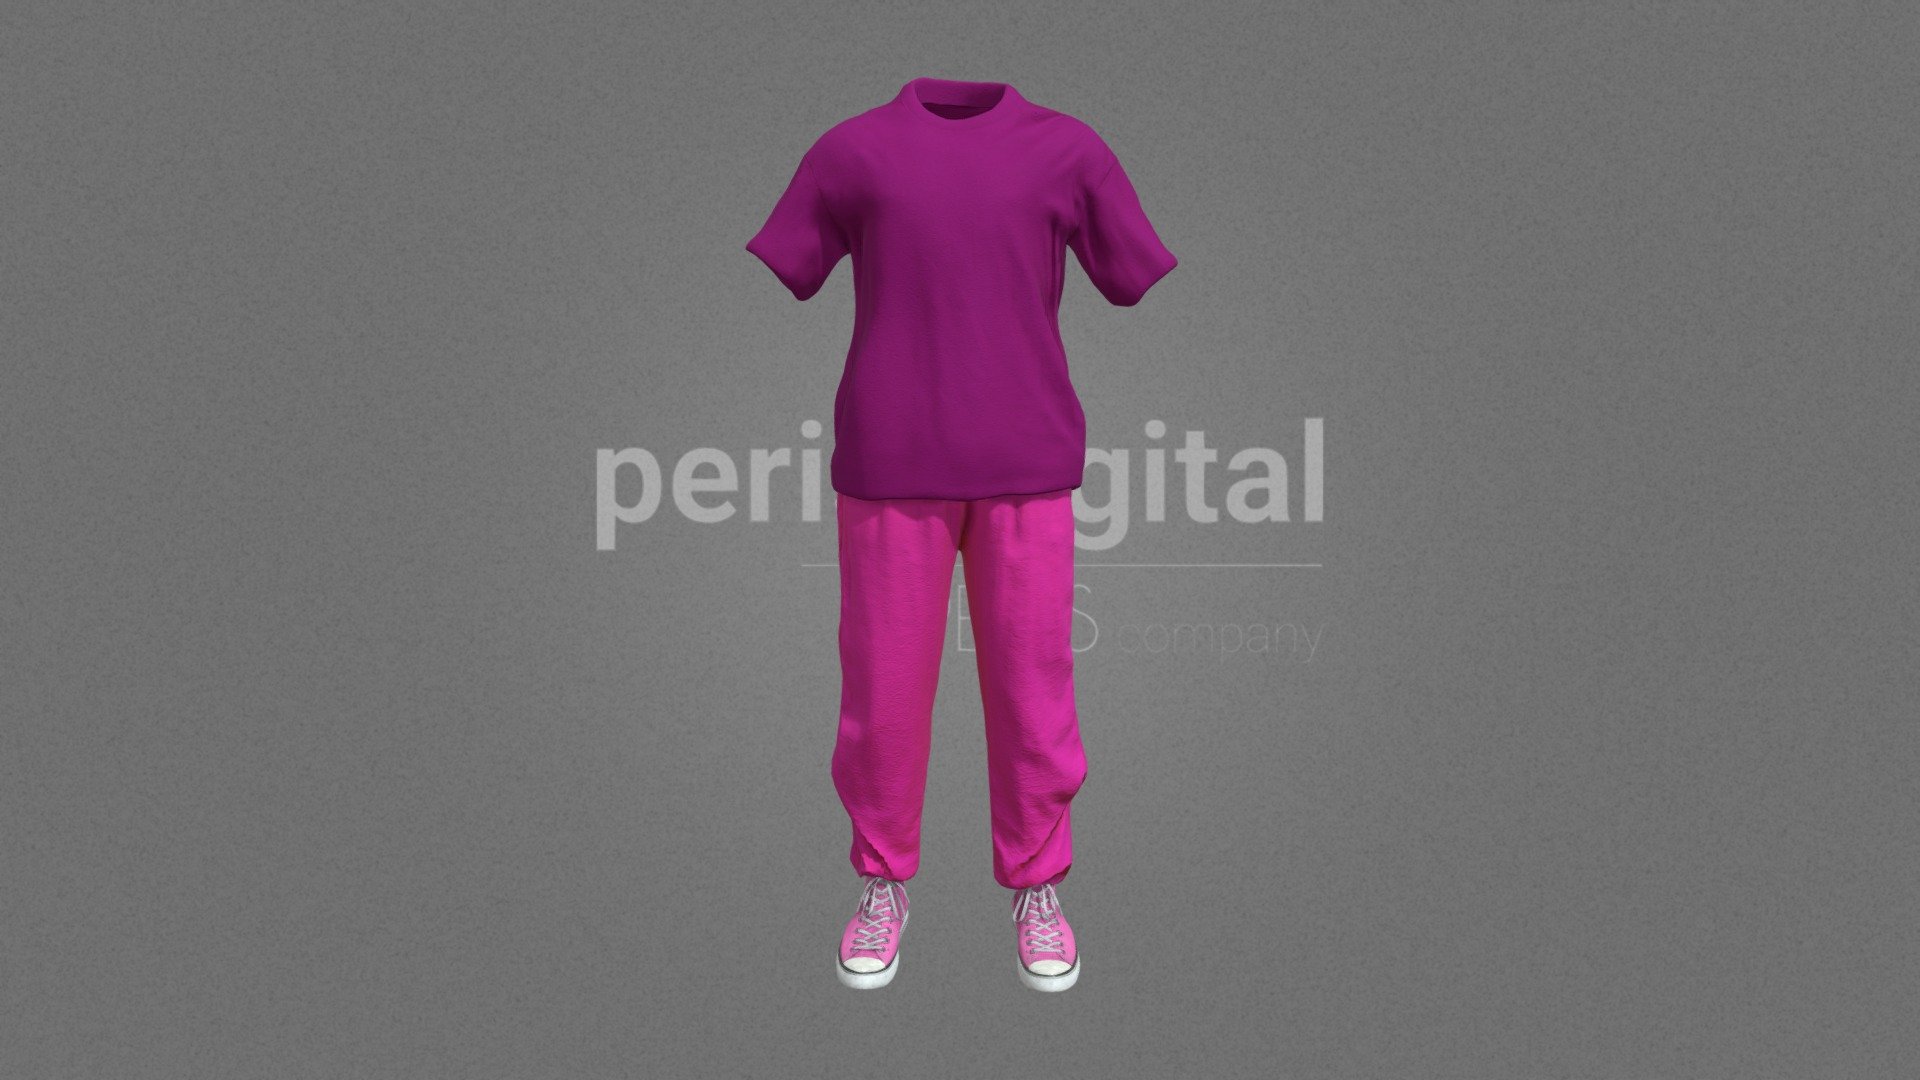 Purple t-shirt, pink trousers, pink and white converse shoes.

PERIS DIGITAL HIGH QUALITY 3D CLOTHING They are optimized for use in medium/high poly 3D scenes and optimized for rendering. We do not include characters, but they are positioned for you to include and adjust your own character. They have a LOW Poly Mesh (LODRIG) inside the Blender file (included in the AdditionalFiles), which you can use for vertex weighting or cloth simulation and thus, make the transfer of vertices or property masks from the LOW to the HIGH model. We have included in Additional Files, the texture maps in high resolution, as well as the Displacement maps in high resolution too, so you can perform extreme point of view with your 3D cameras. With the Blender file (included in AdditionalFiles) you will be able to edit any aspect of the set . Enjoy it!

Web: https://peris.digital/ - 80s Fashion Series - Woman 12 - 3D model by Peris Digital (@perisdigital) 3d model